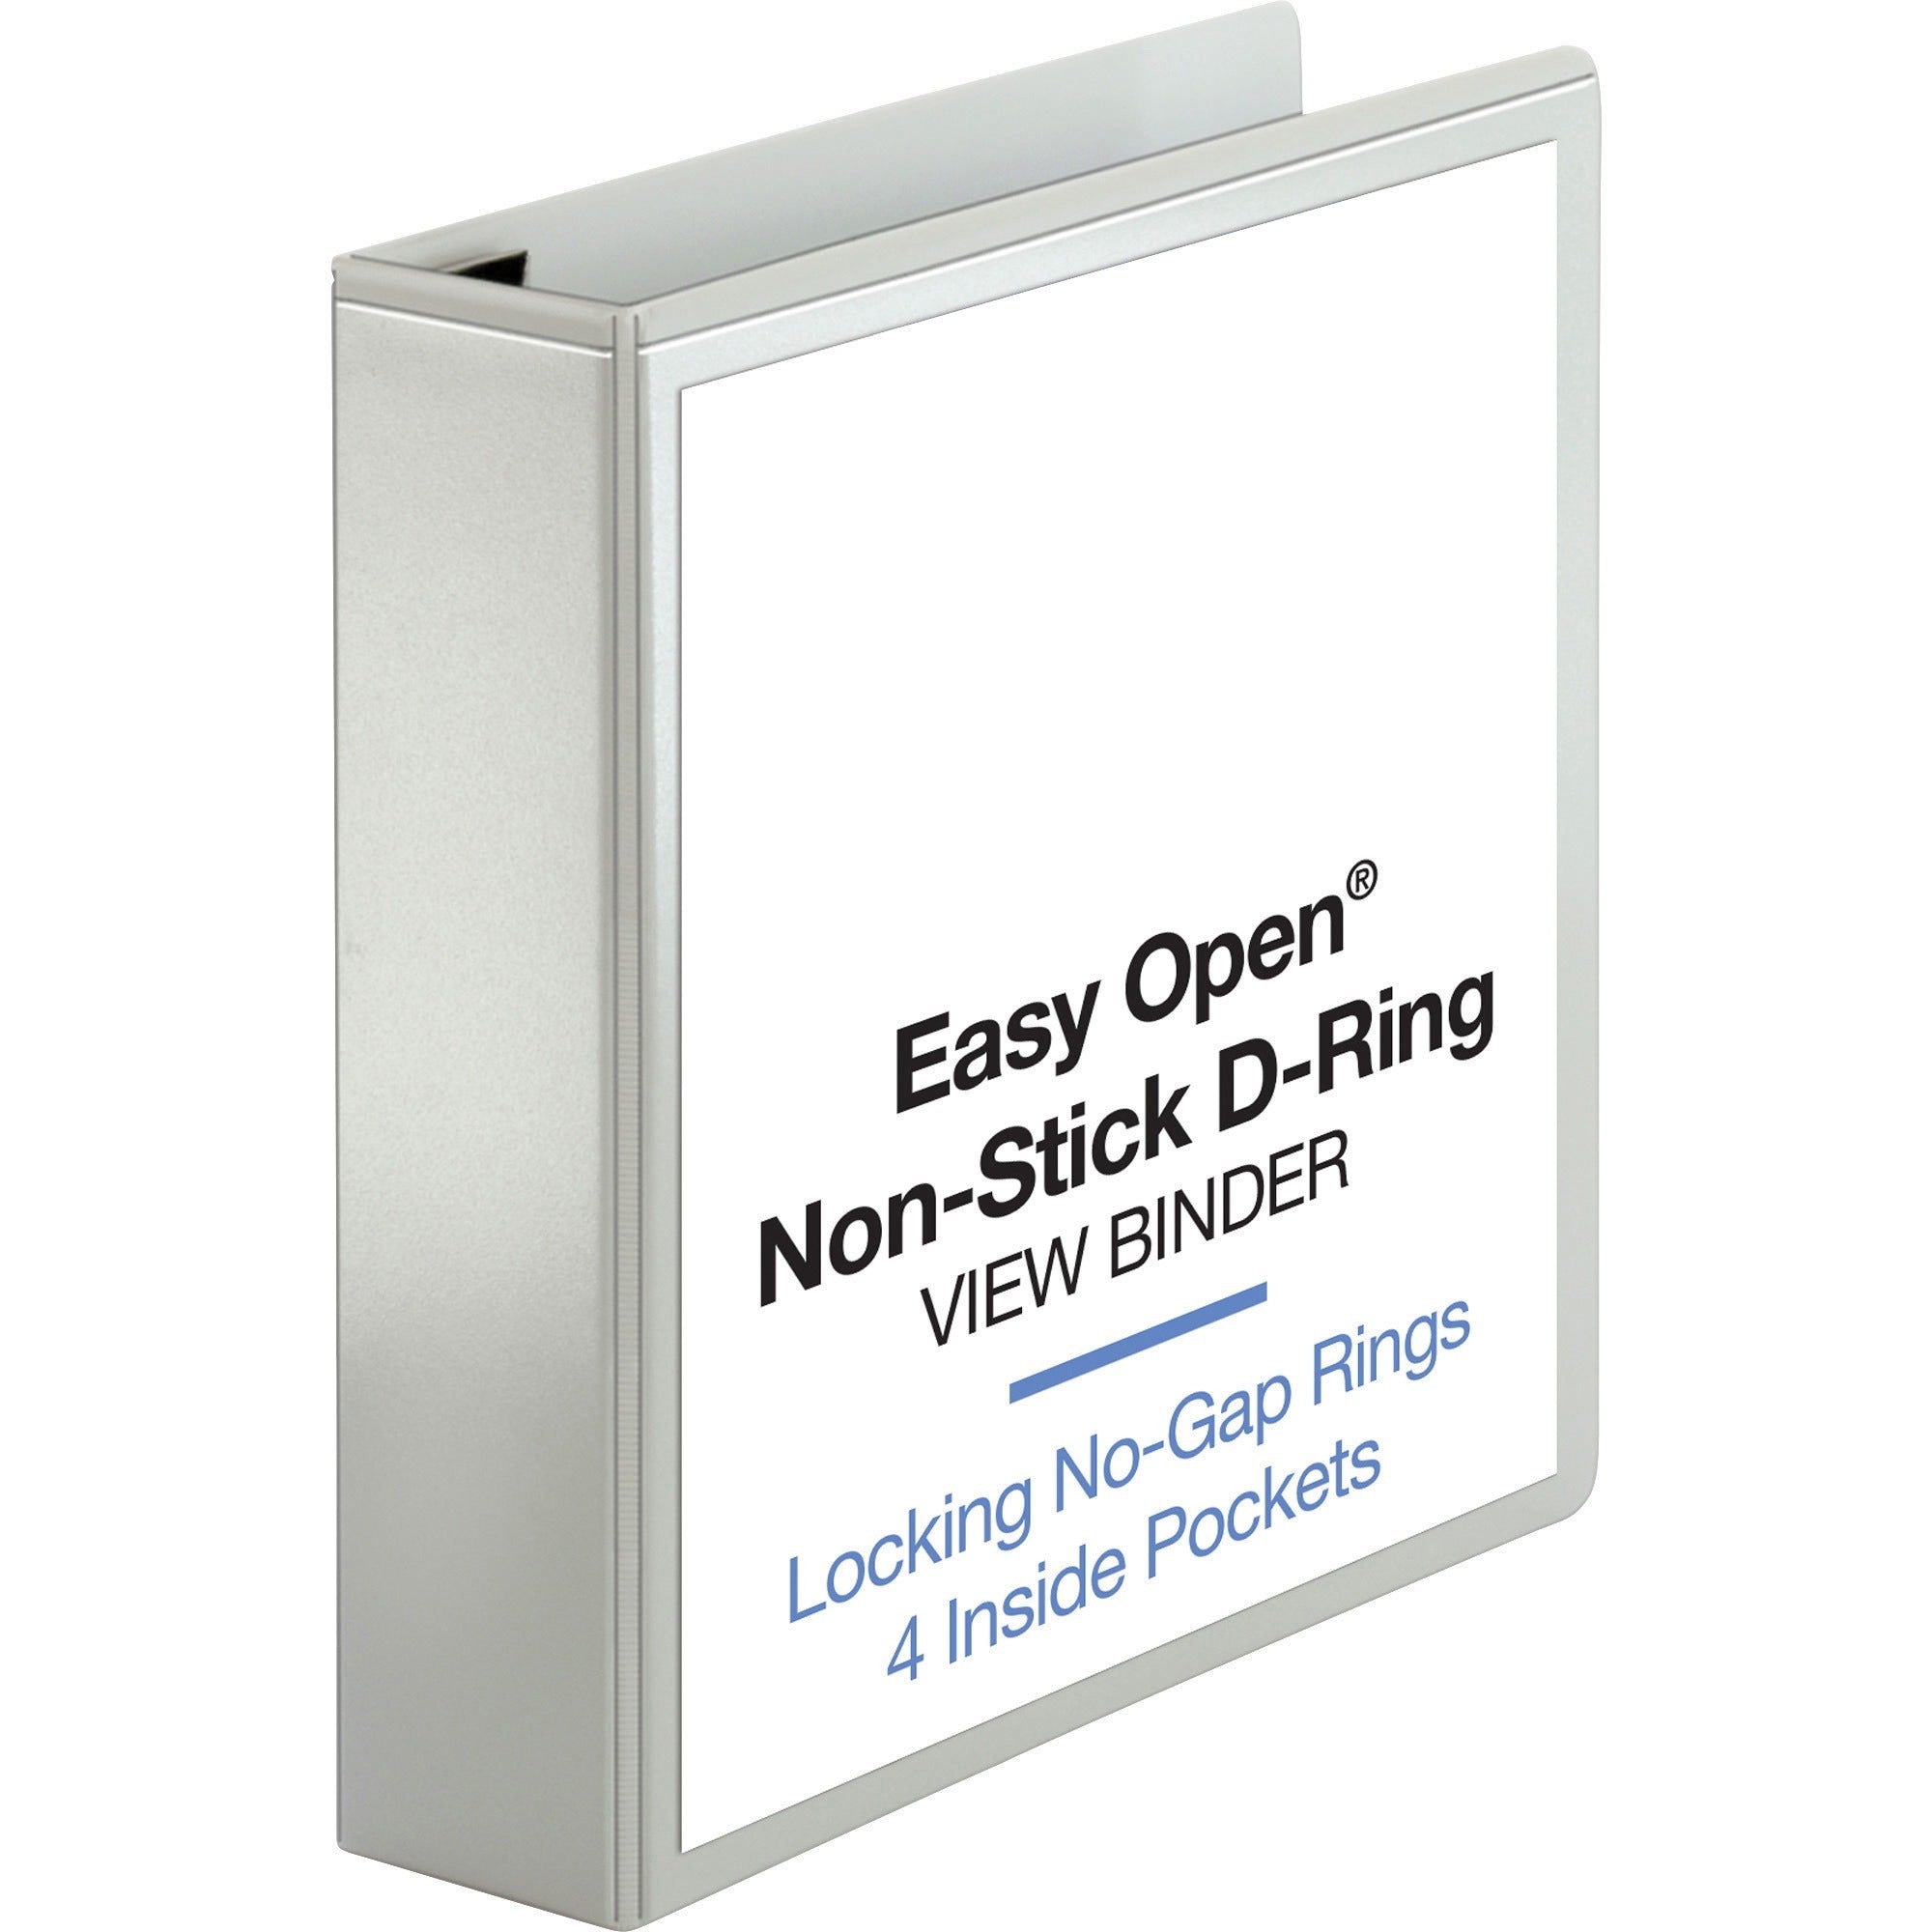 business-source-locking-d-ring-view-binder-2-binder-capacity-letter-8-1-2-x-11-sheet-size-500-sheet-capacity-d-ring-fasteners-4-inside-front-&-back-pockets-polypropylene-chipboard-white-recycled-acid-free-non-glare-clear_bsn26959 - 1